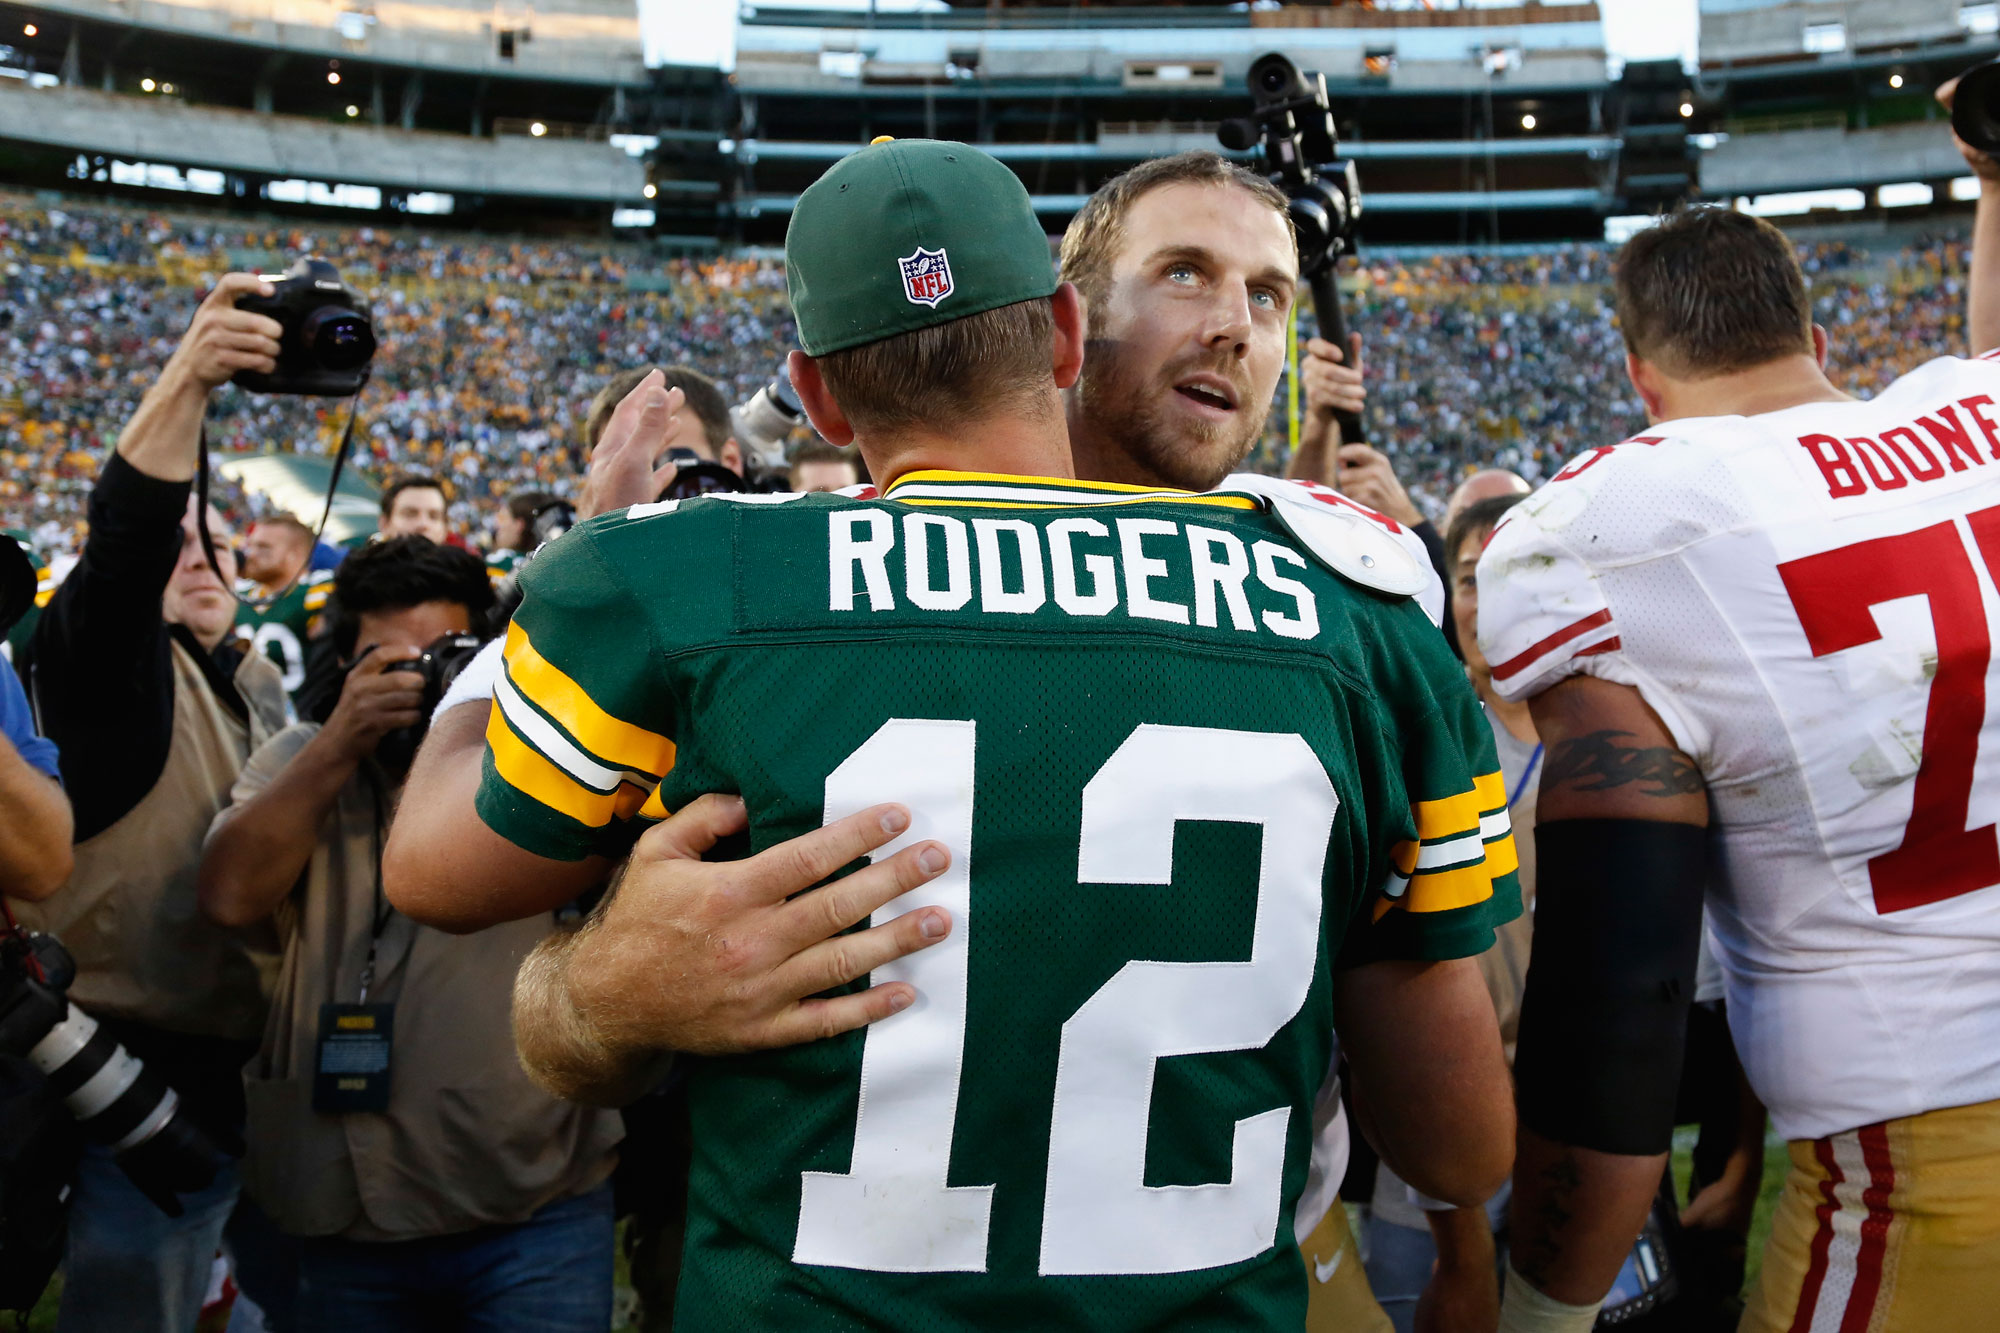 Alex Smith #11 of the San Francisco 49ers hugs Aaron Rodgers #12 of the Green Bay Packers after the game at Lambeau Field on September 9, 2012 in Green Bay, Wisconsin. The 49ers won 30-22. (Photo by Joe Robbins/Getty Images)